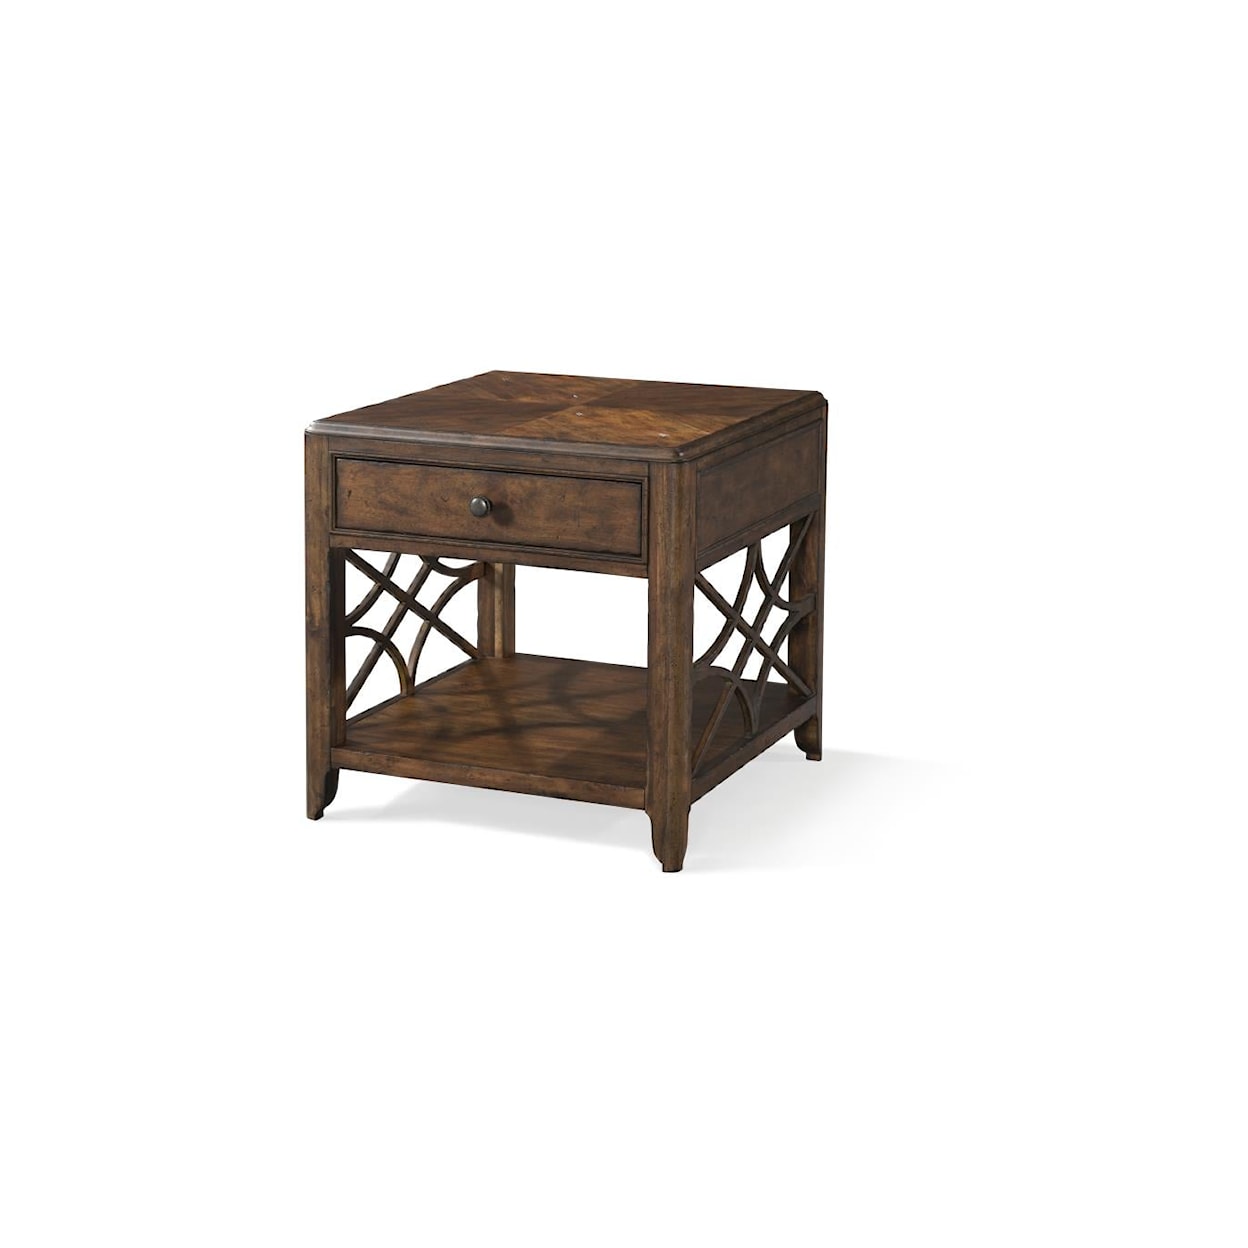 Trisha Yearwood Home Collection by Legacy Classic Trisha Yearwood Home End Table